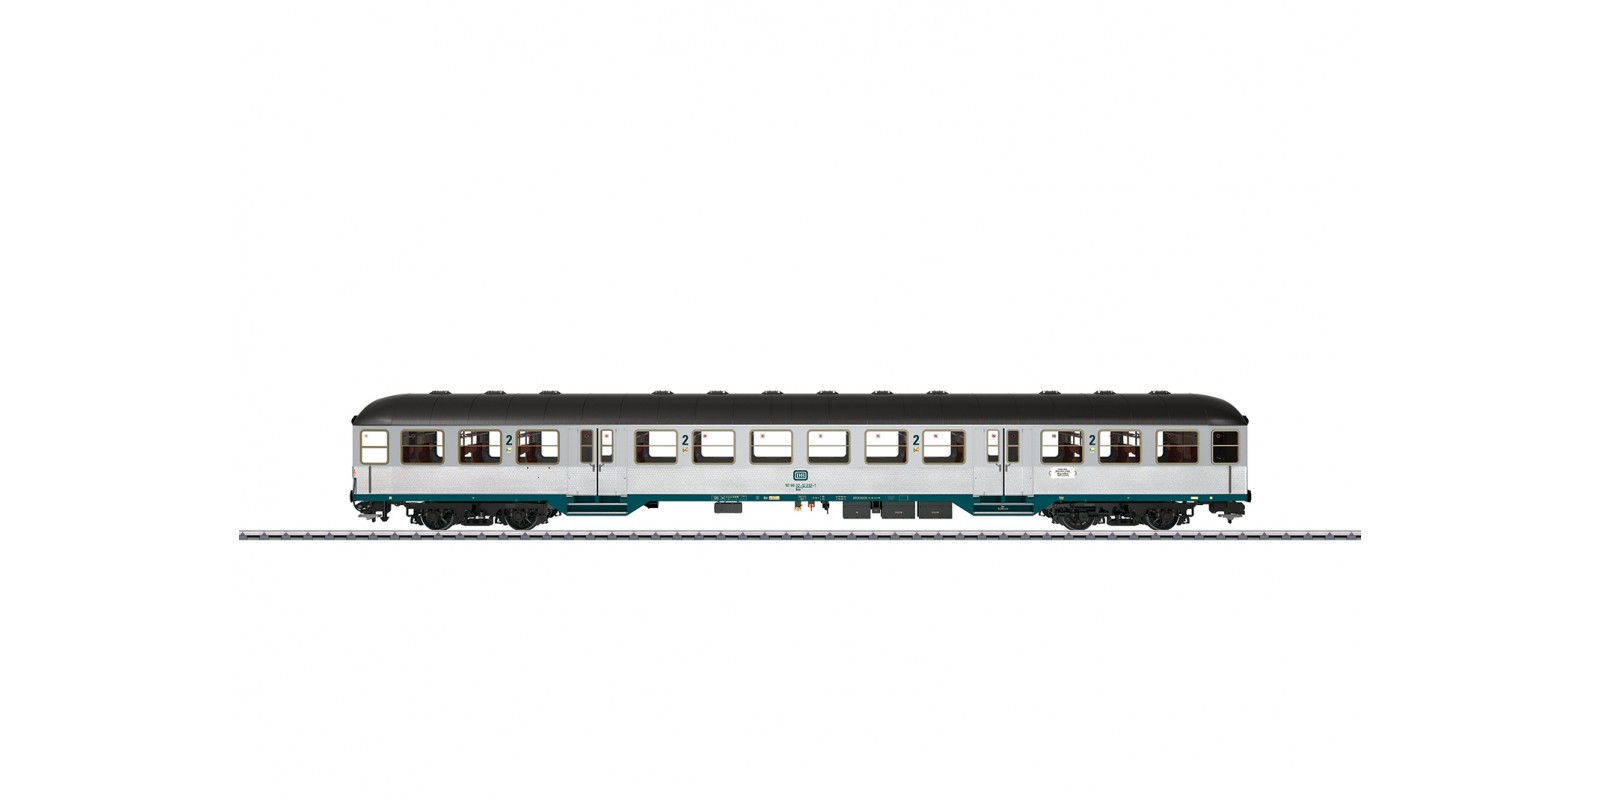 58347 Silberlinge / "Silver Coins" Commuter Car